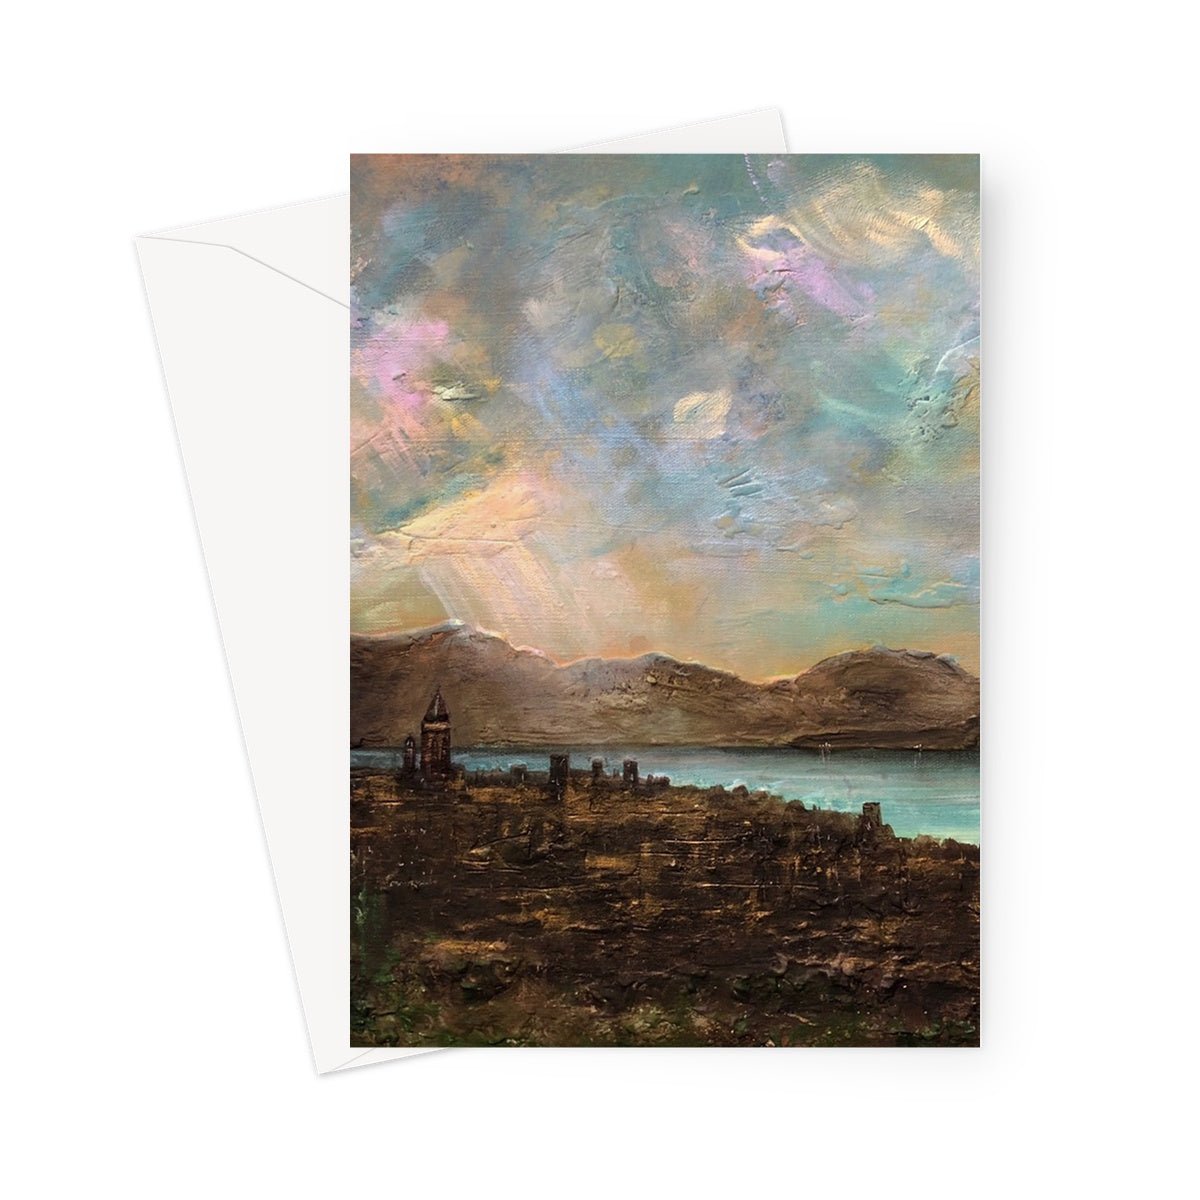 Angels Fingers Over Greenock Art Gifts Greeting Card-Greetings Cards-River Clyde Art Gallery-5"x7"-10 Cards-Paintings, Prints, Homeware, Art Gifts From Scotland By Scottish Artist Kevin Hunter